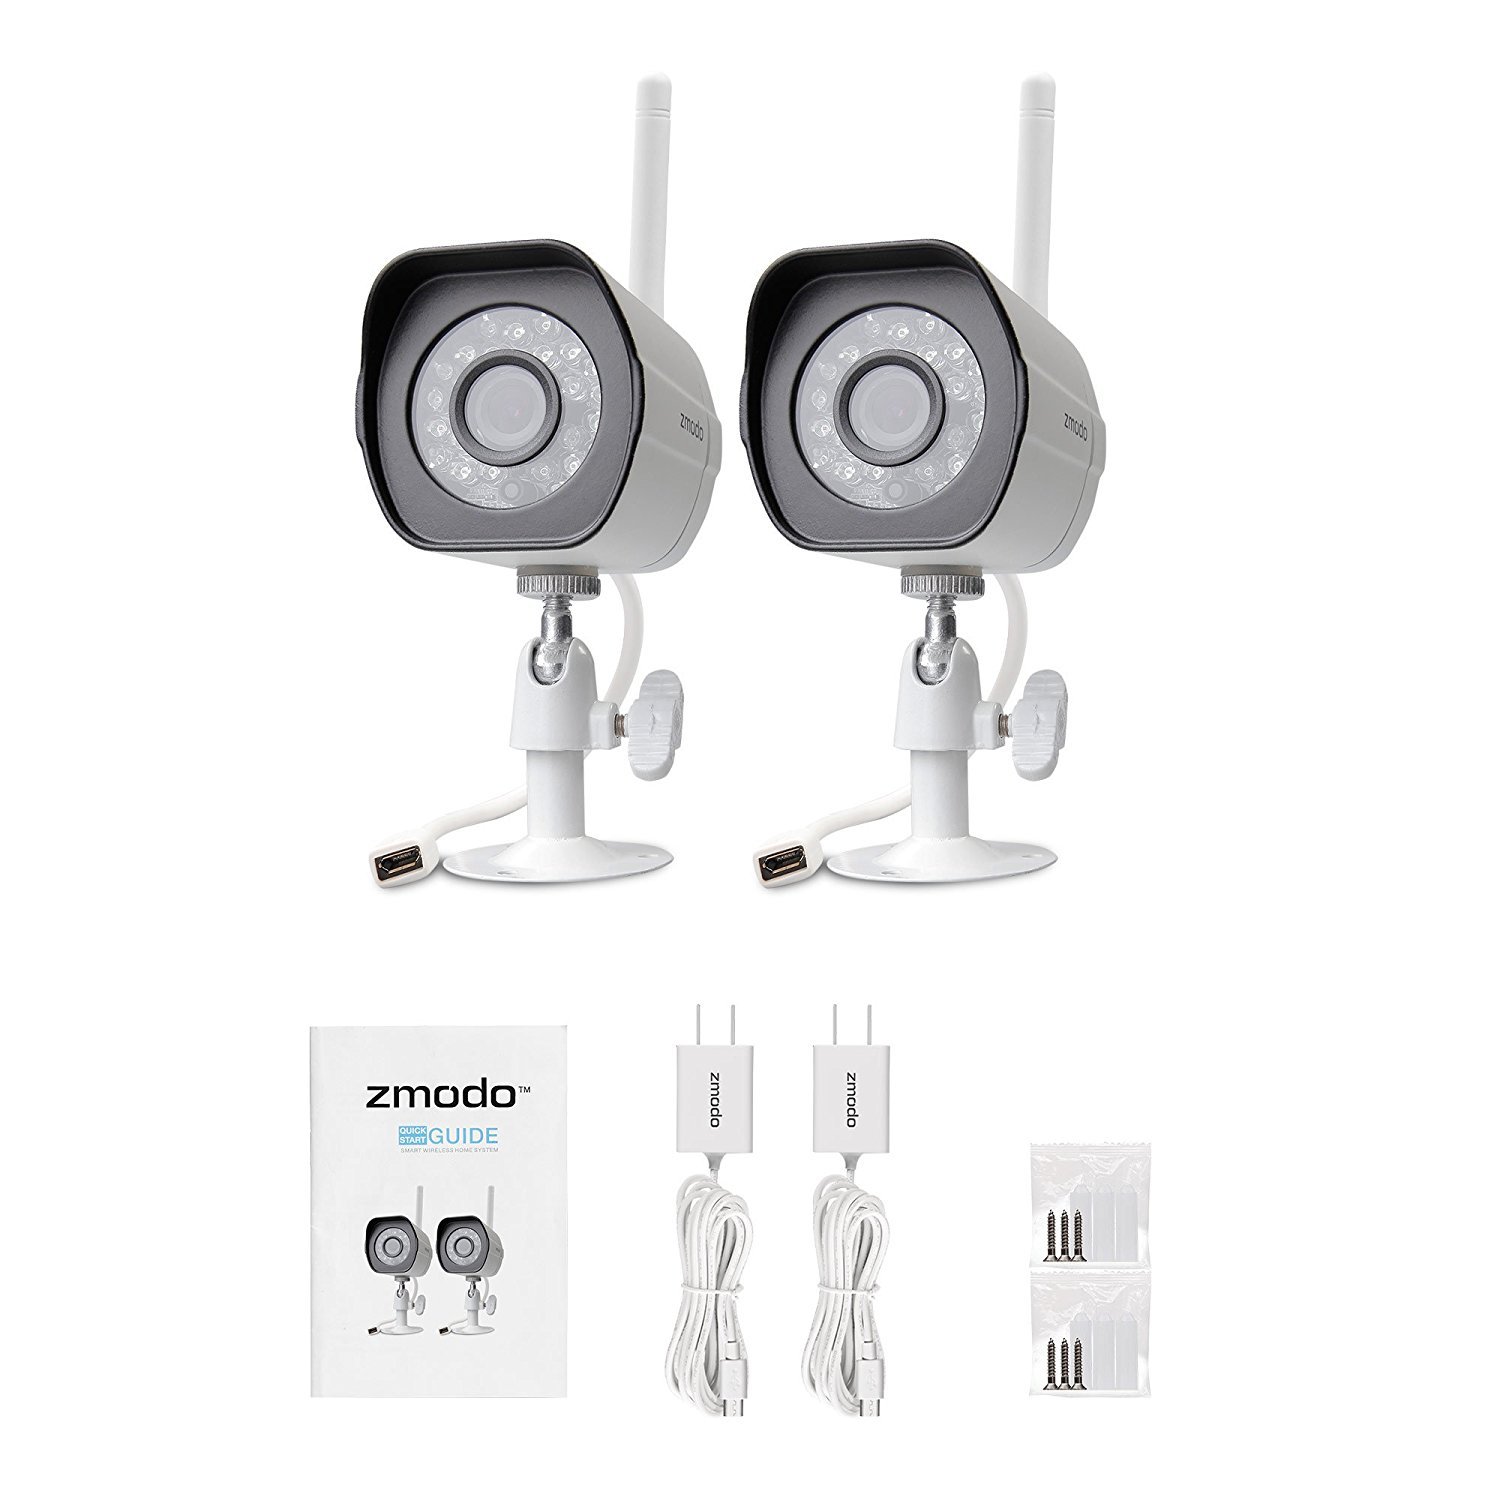 2 IP Camera Security System Zmodo 720p HD Wi-Fi Wireless with Night Vision 